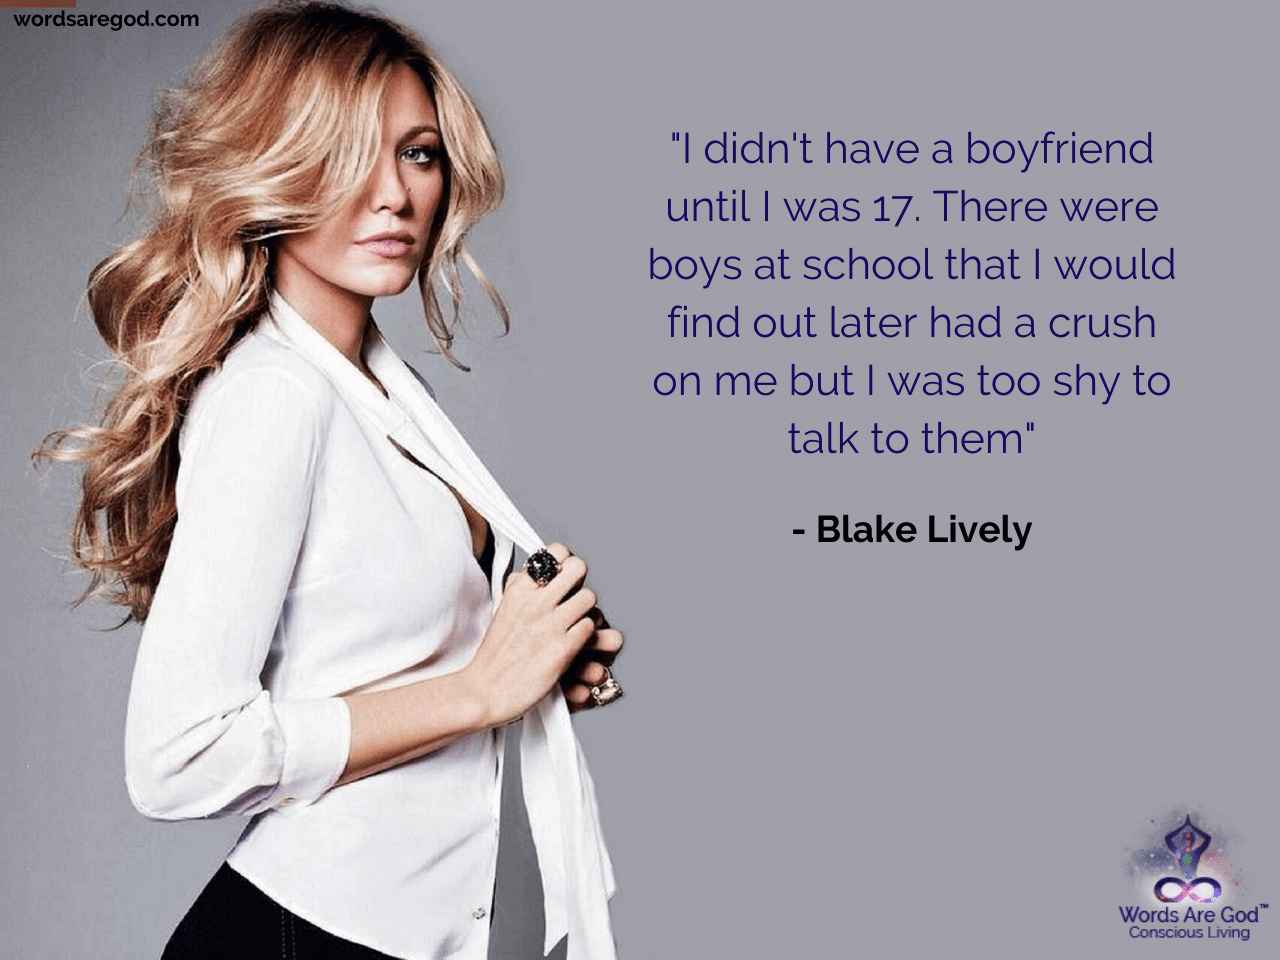 Blake Lively Motivational Quote